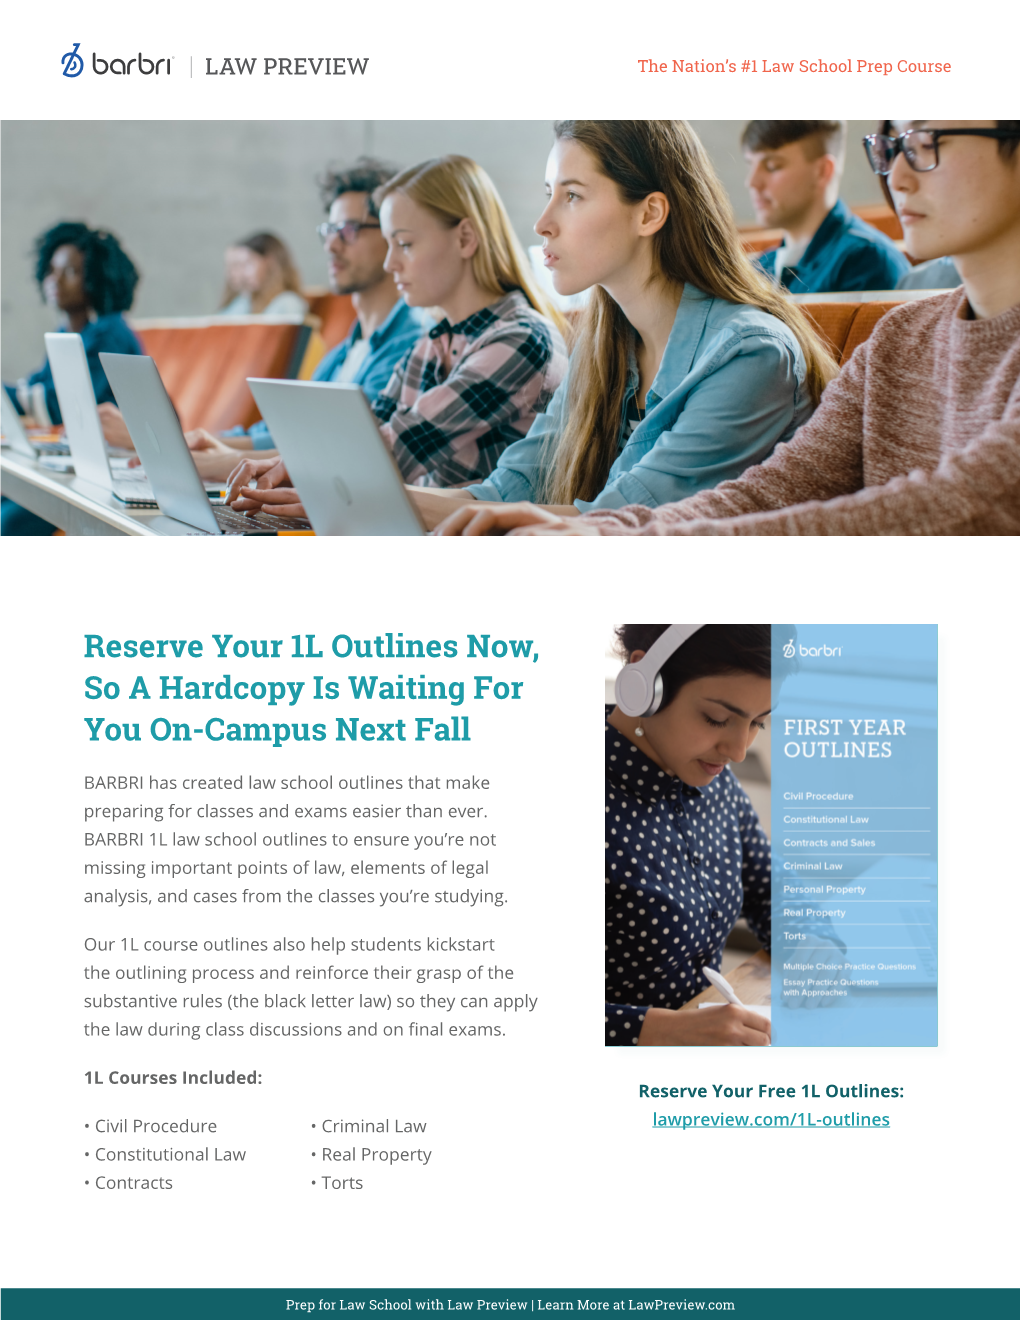 Reserve Your 1L Outlines Now, So a Hardcopy Is Waiting for You On-Campus Next Fall